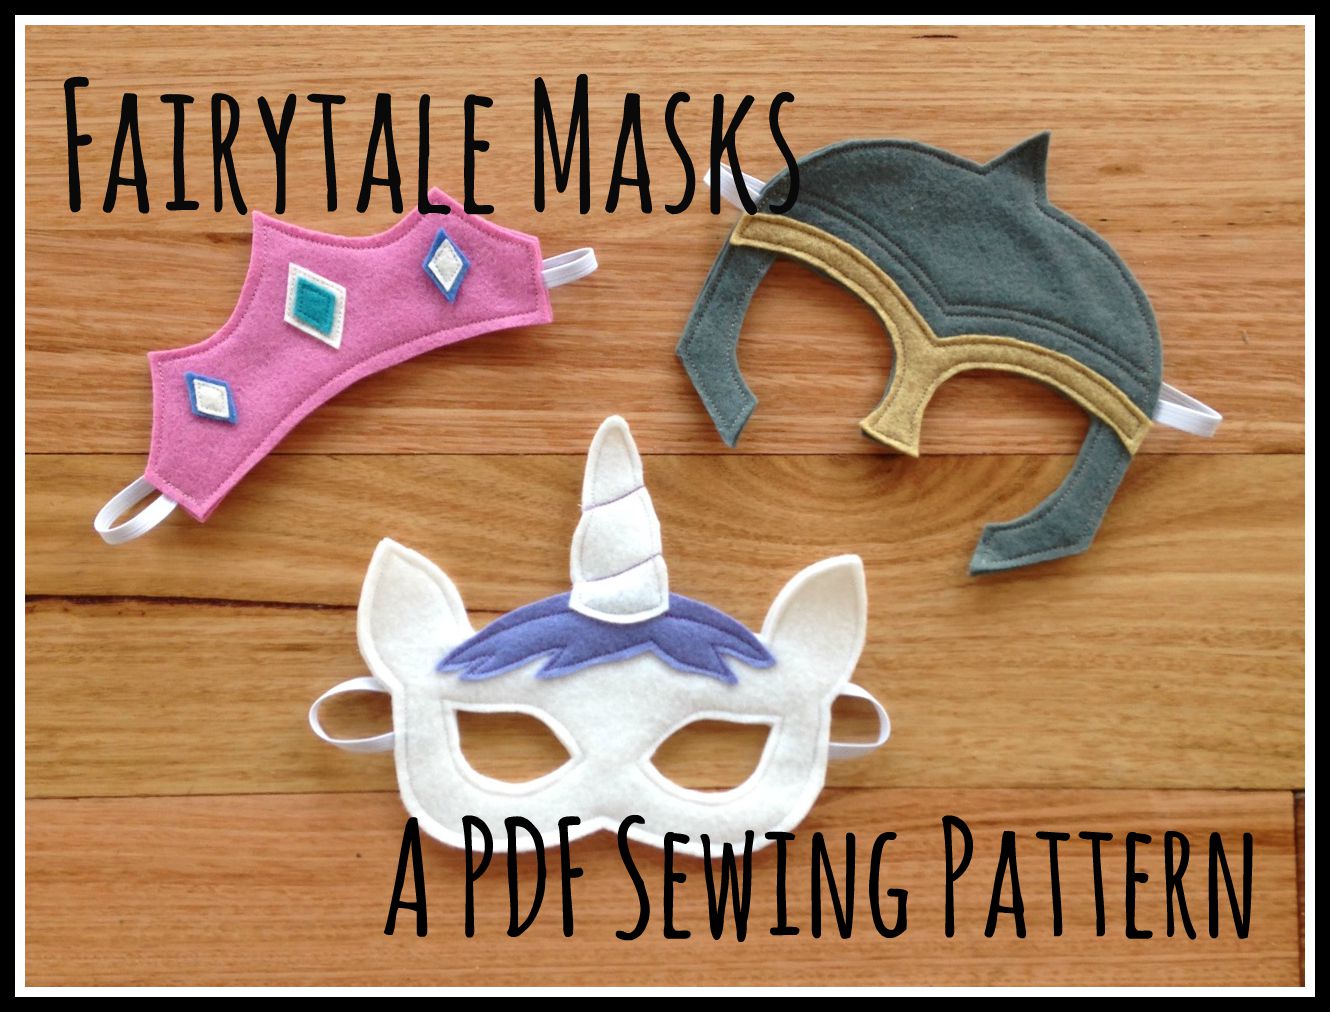 Korridor Mose interferens Fairytale Felt Mask Patterns now in my Etsy Store! — Willow and Stitch